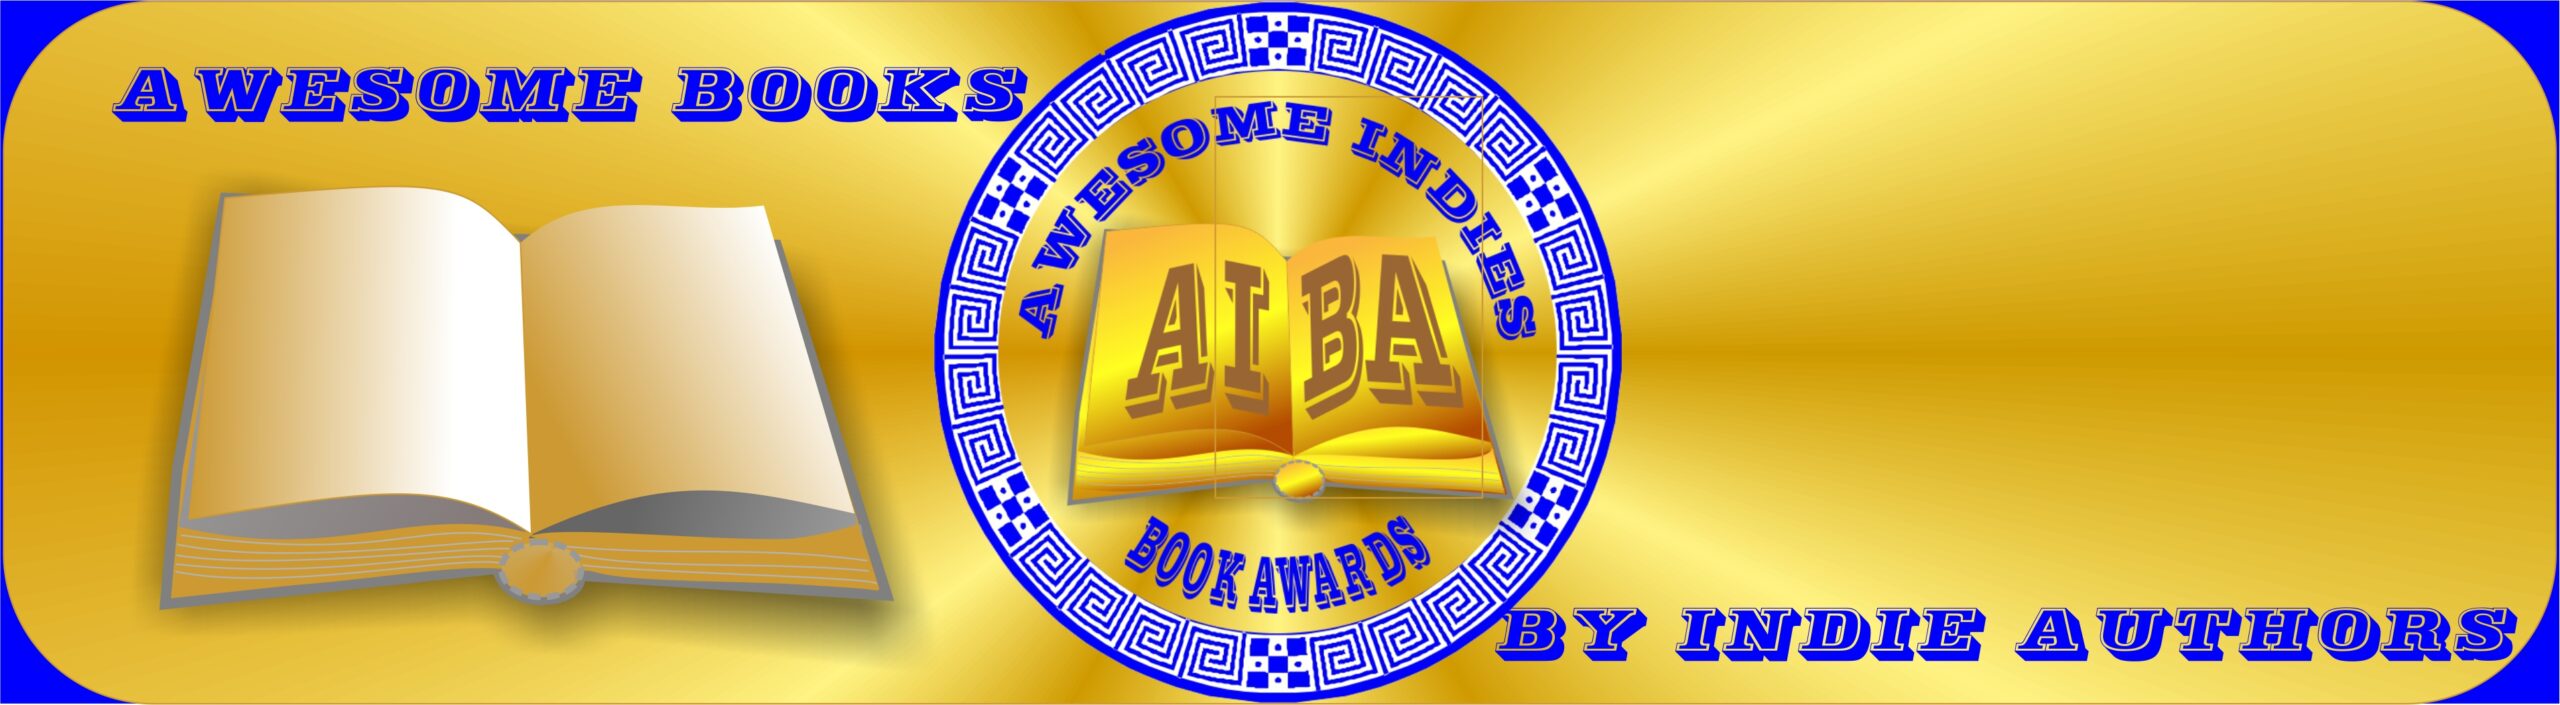 Awesome Indies Book Awards